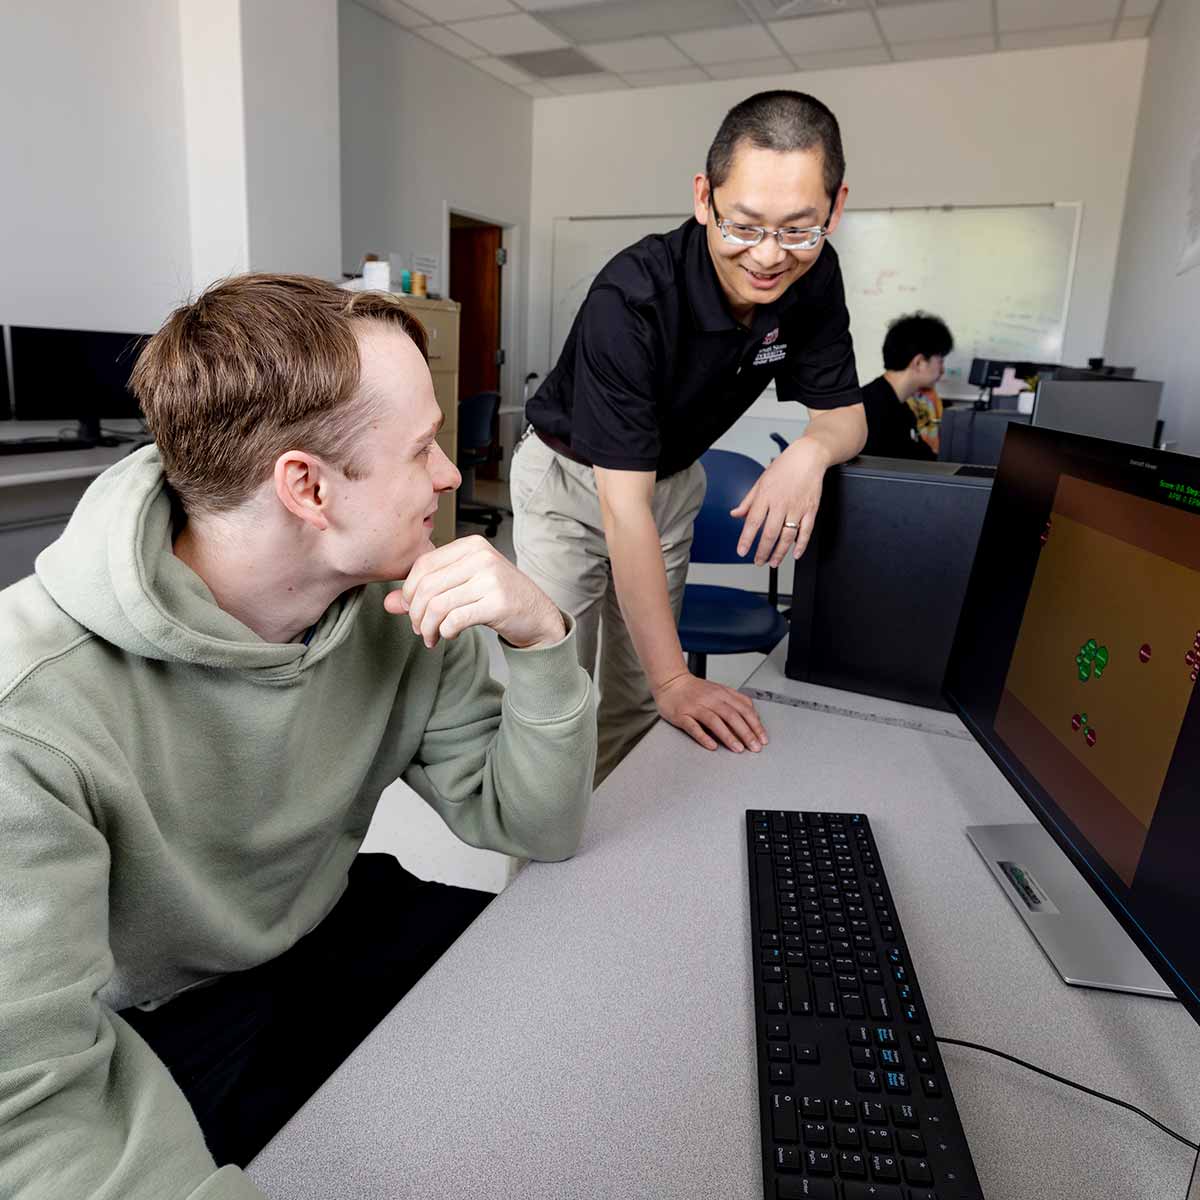 Dr. Siming Liu and a graduate student share a laugh while working together in a research lab. Blocks of data are shown on a computer monitor in front of them.